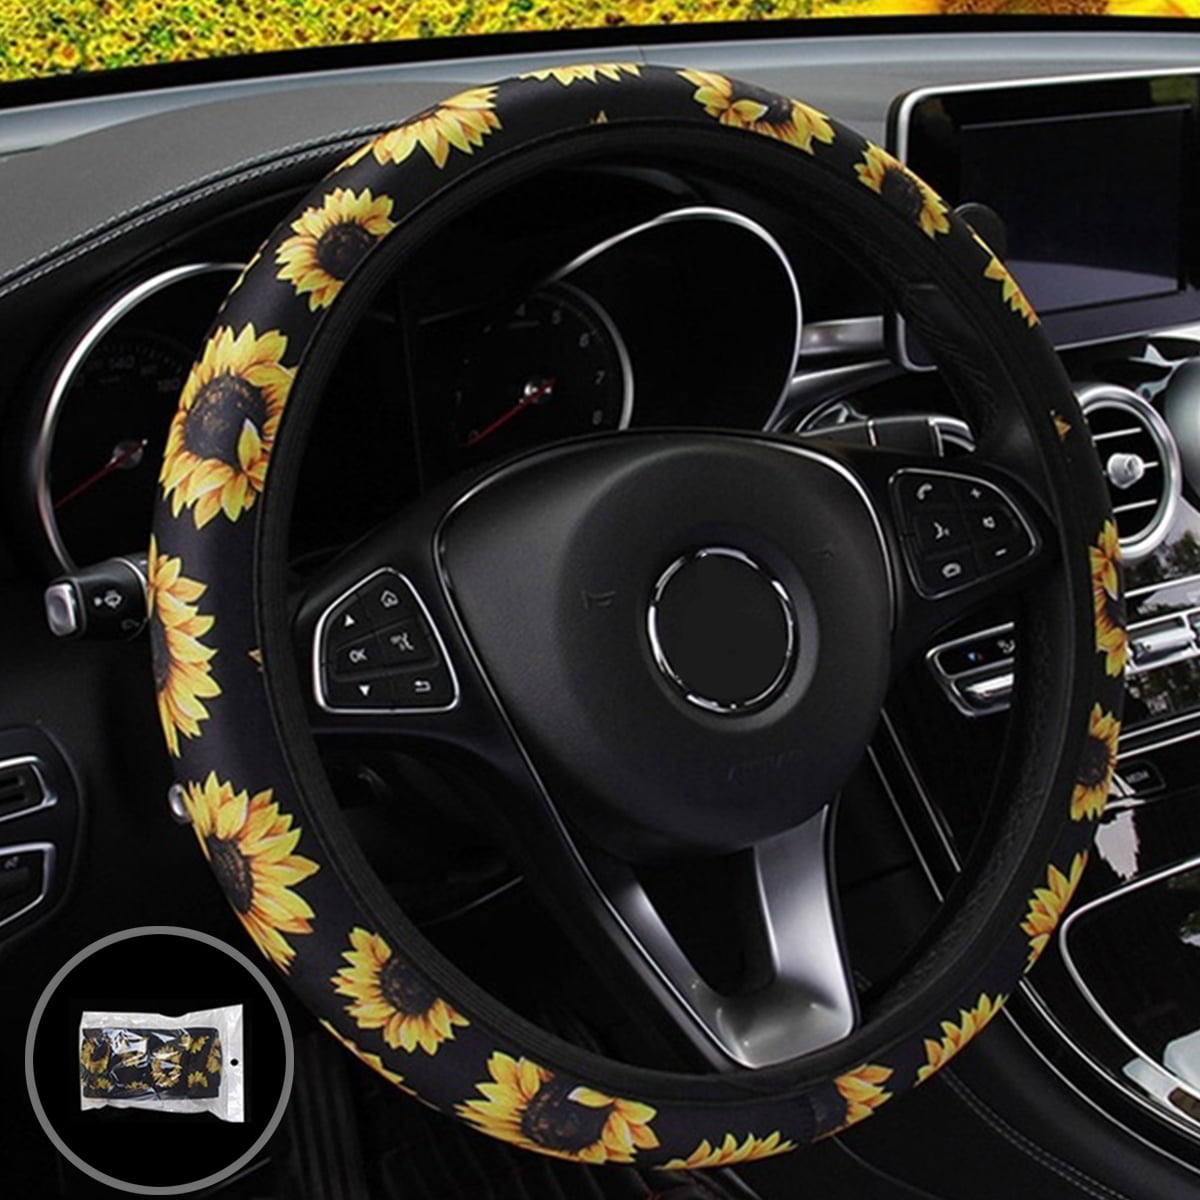 Car Elastic Universal Steering Wheel Cover Flowers Print for Auto Decoration 